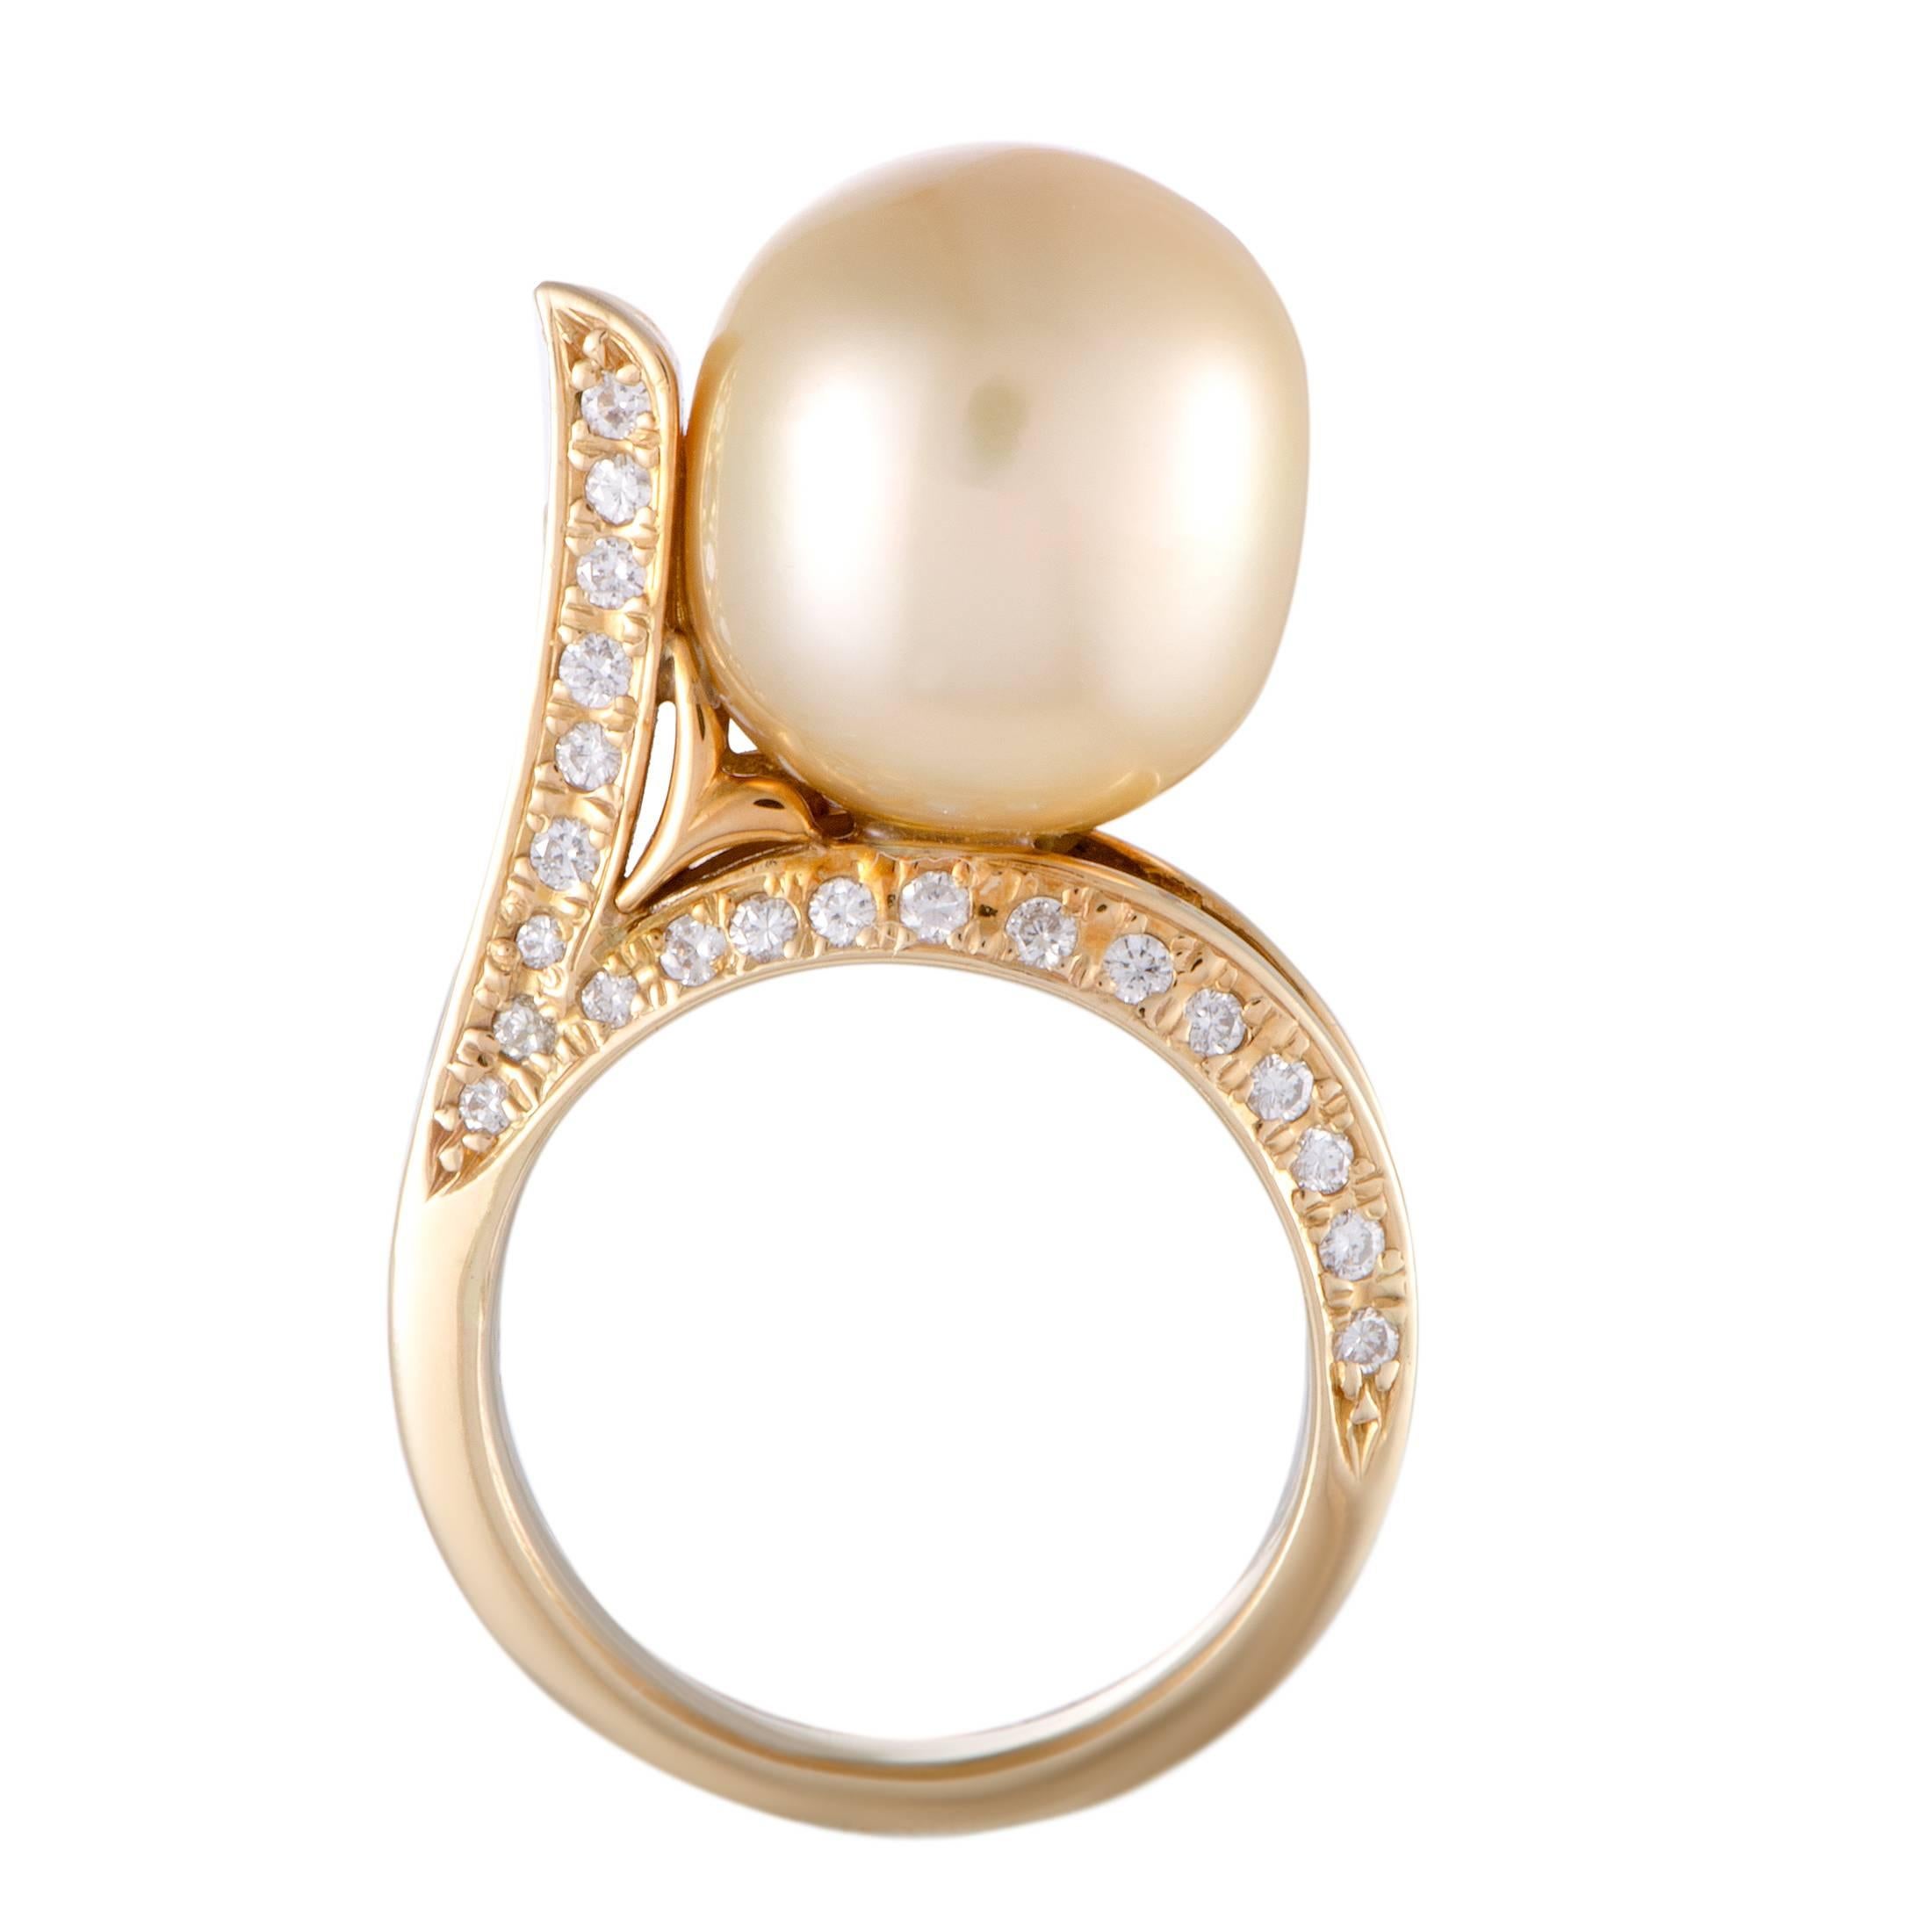 A splendidly harmonious blend of precious metal and stones, this exquisite ring is a piece of immense aesthetic and artistic value. The ring is beautifully made of 18K yellow gold and decorated with a gorgeous golden pearl and with scintillating